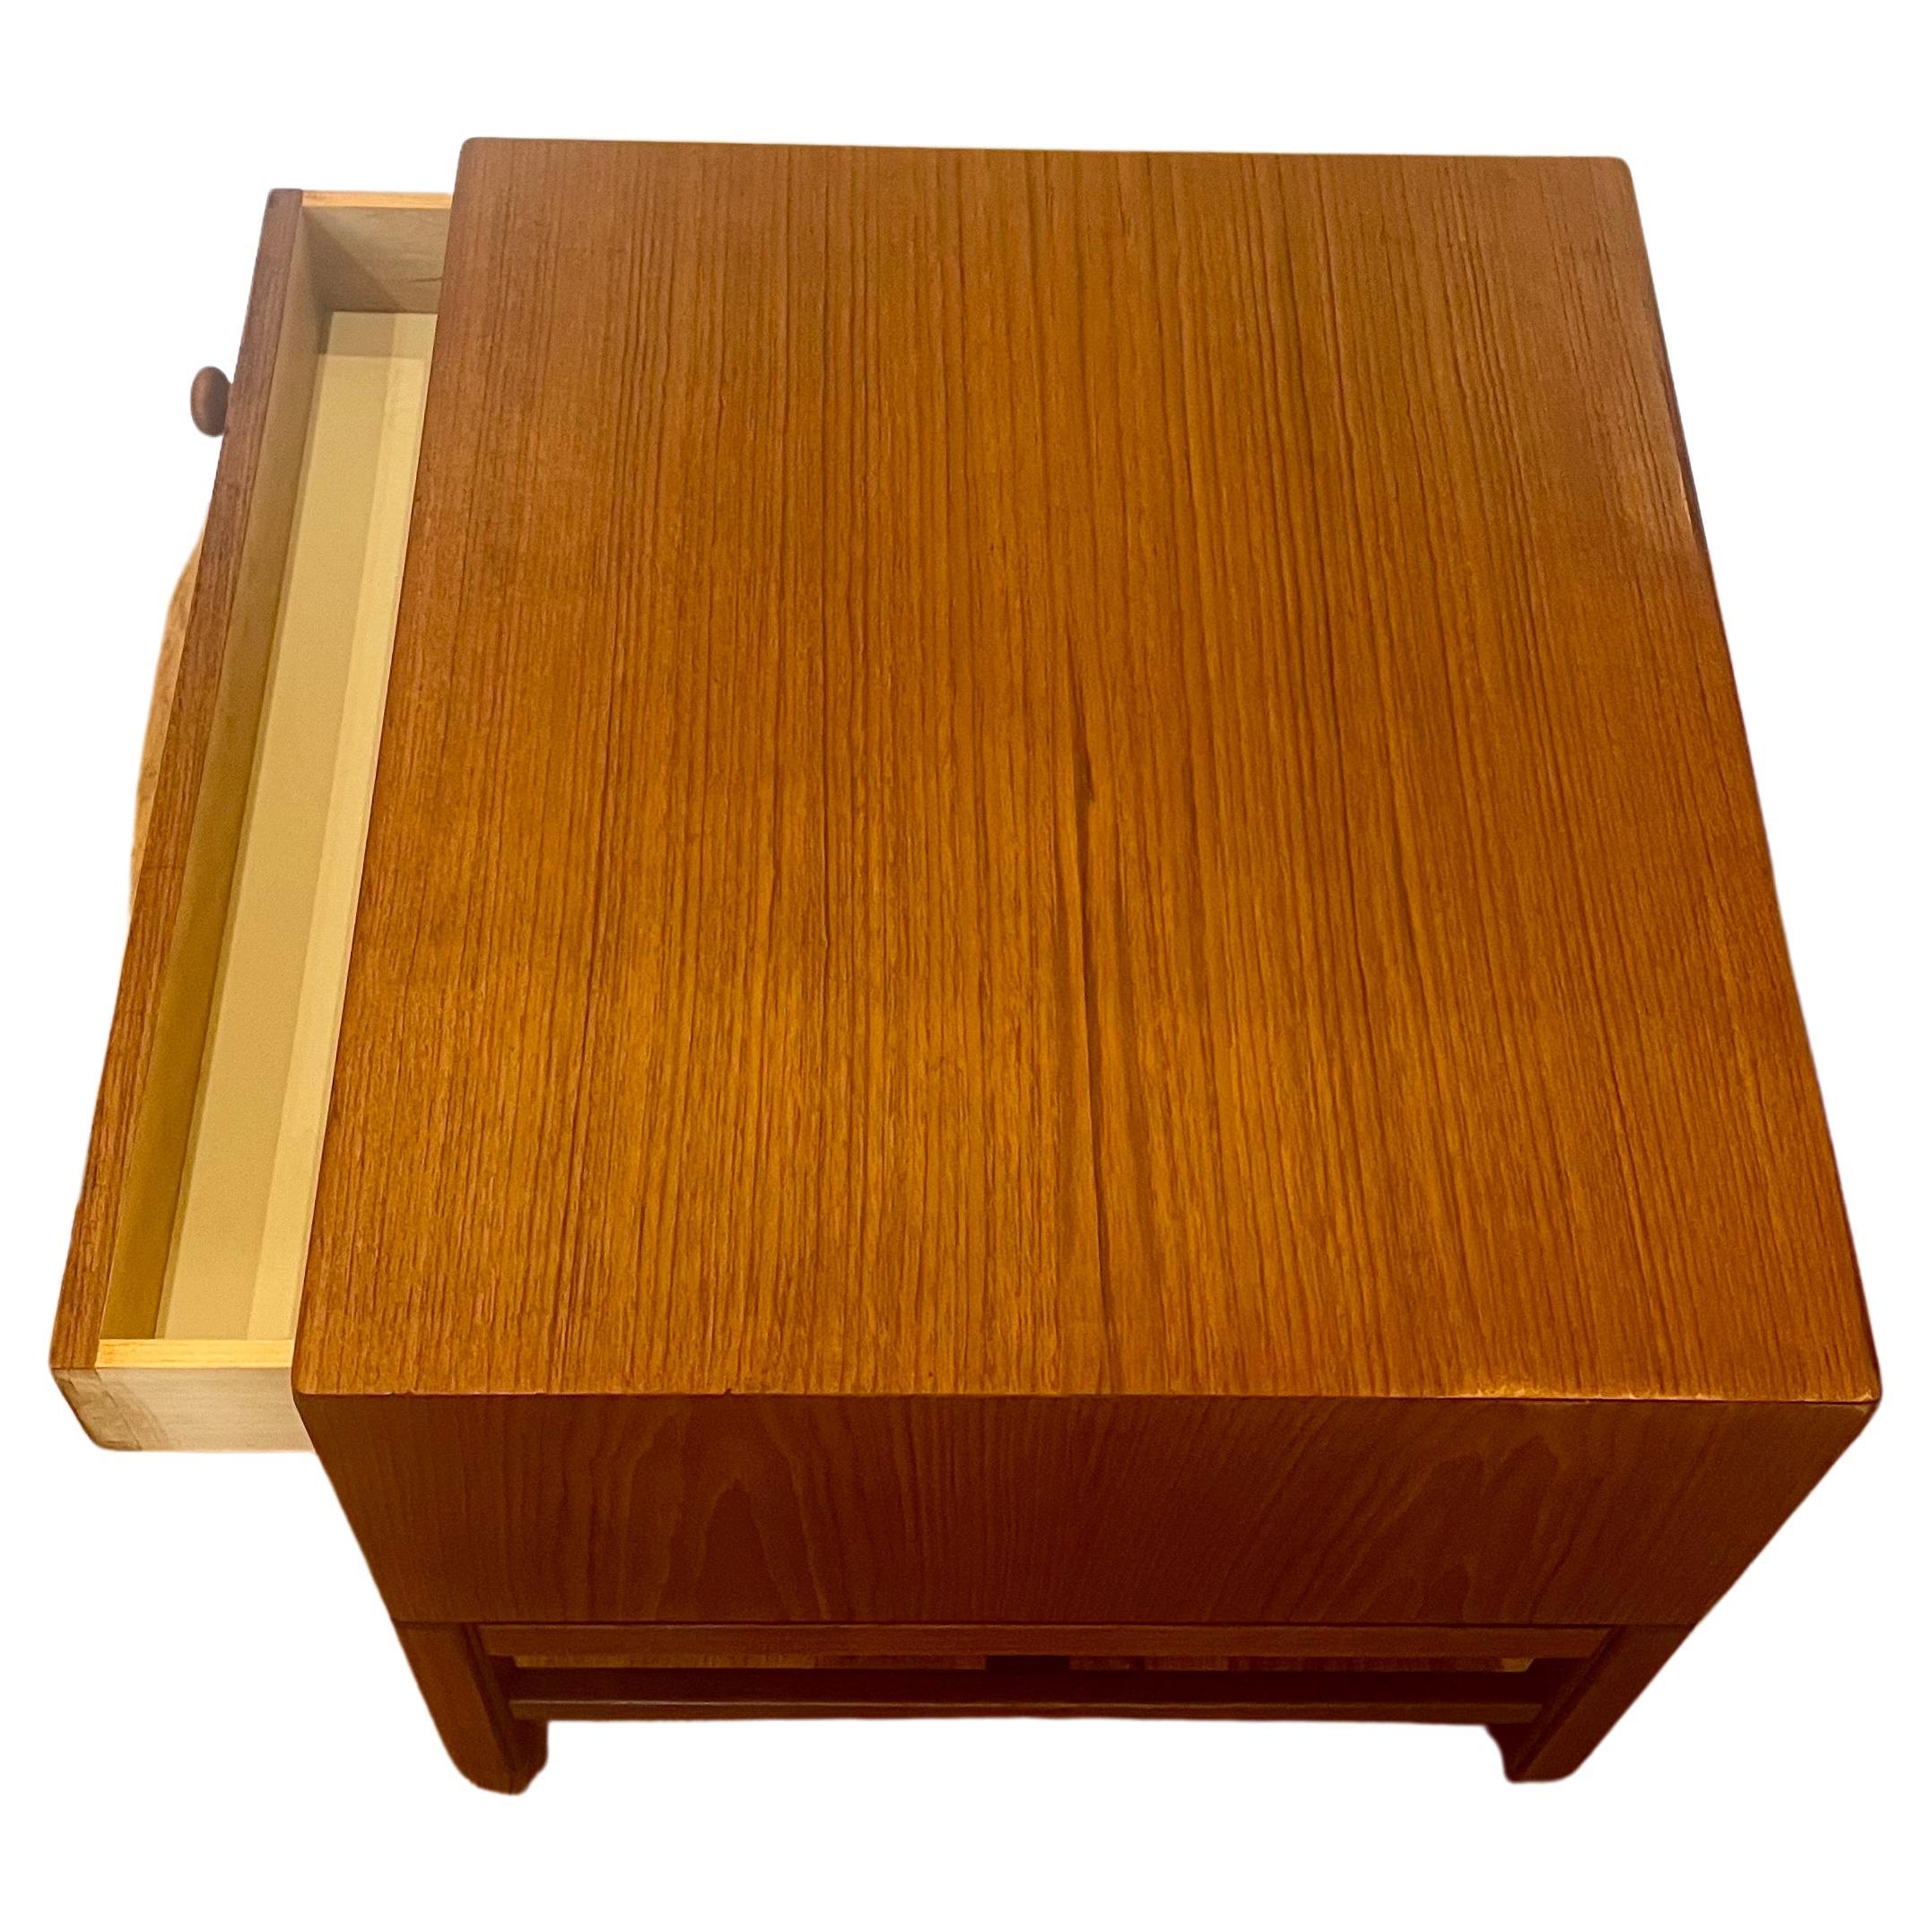 Swedish Modern Rare Teak Small Cabinet Designed by Engstrom & Myrstrand  In Good Condition For Sale In San Diego, CA